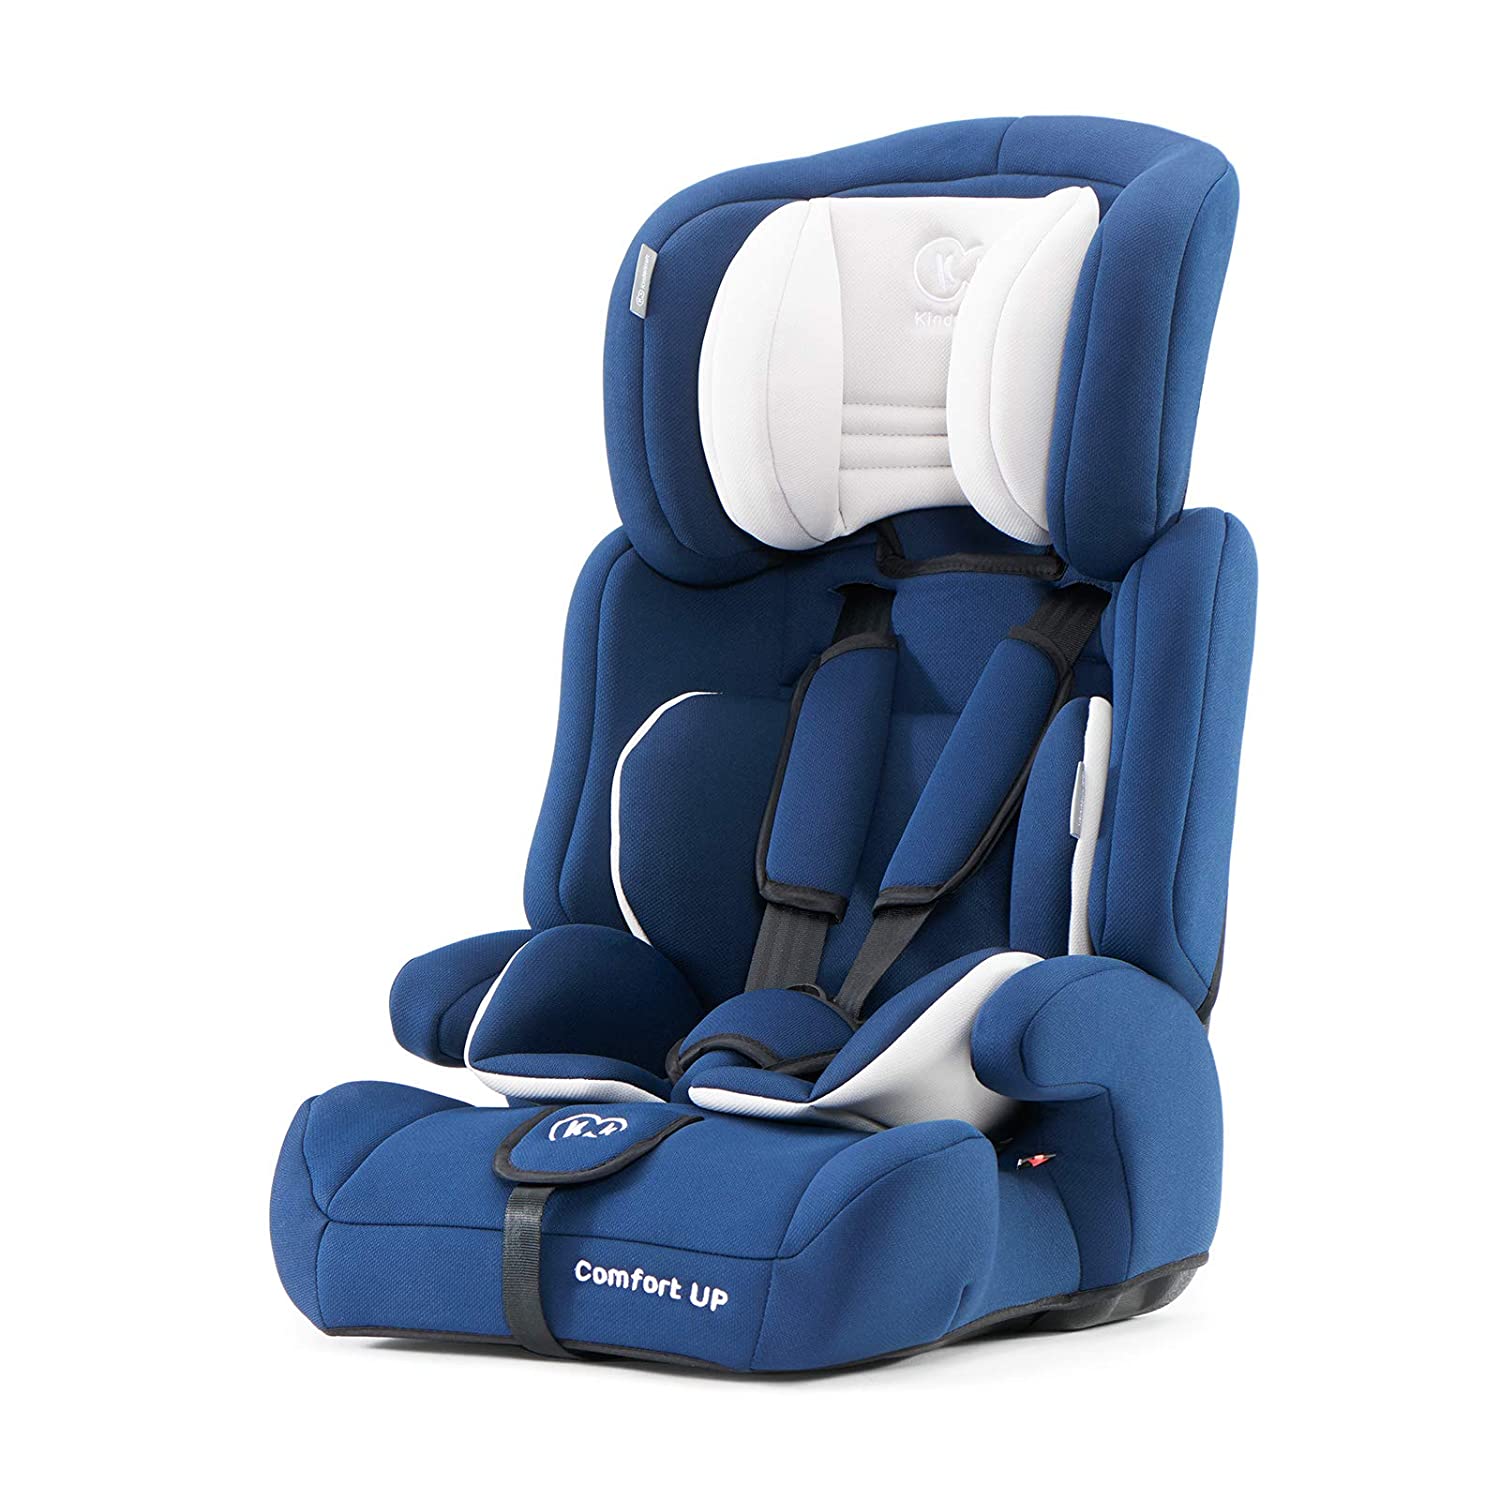 All About Kinder Kraft Convertible Car Seat